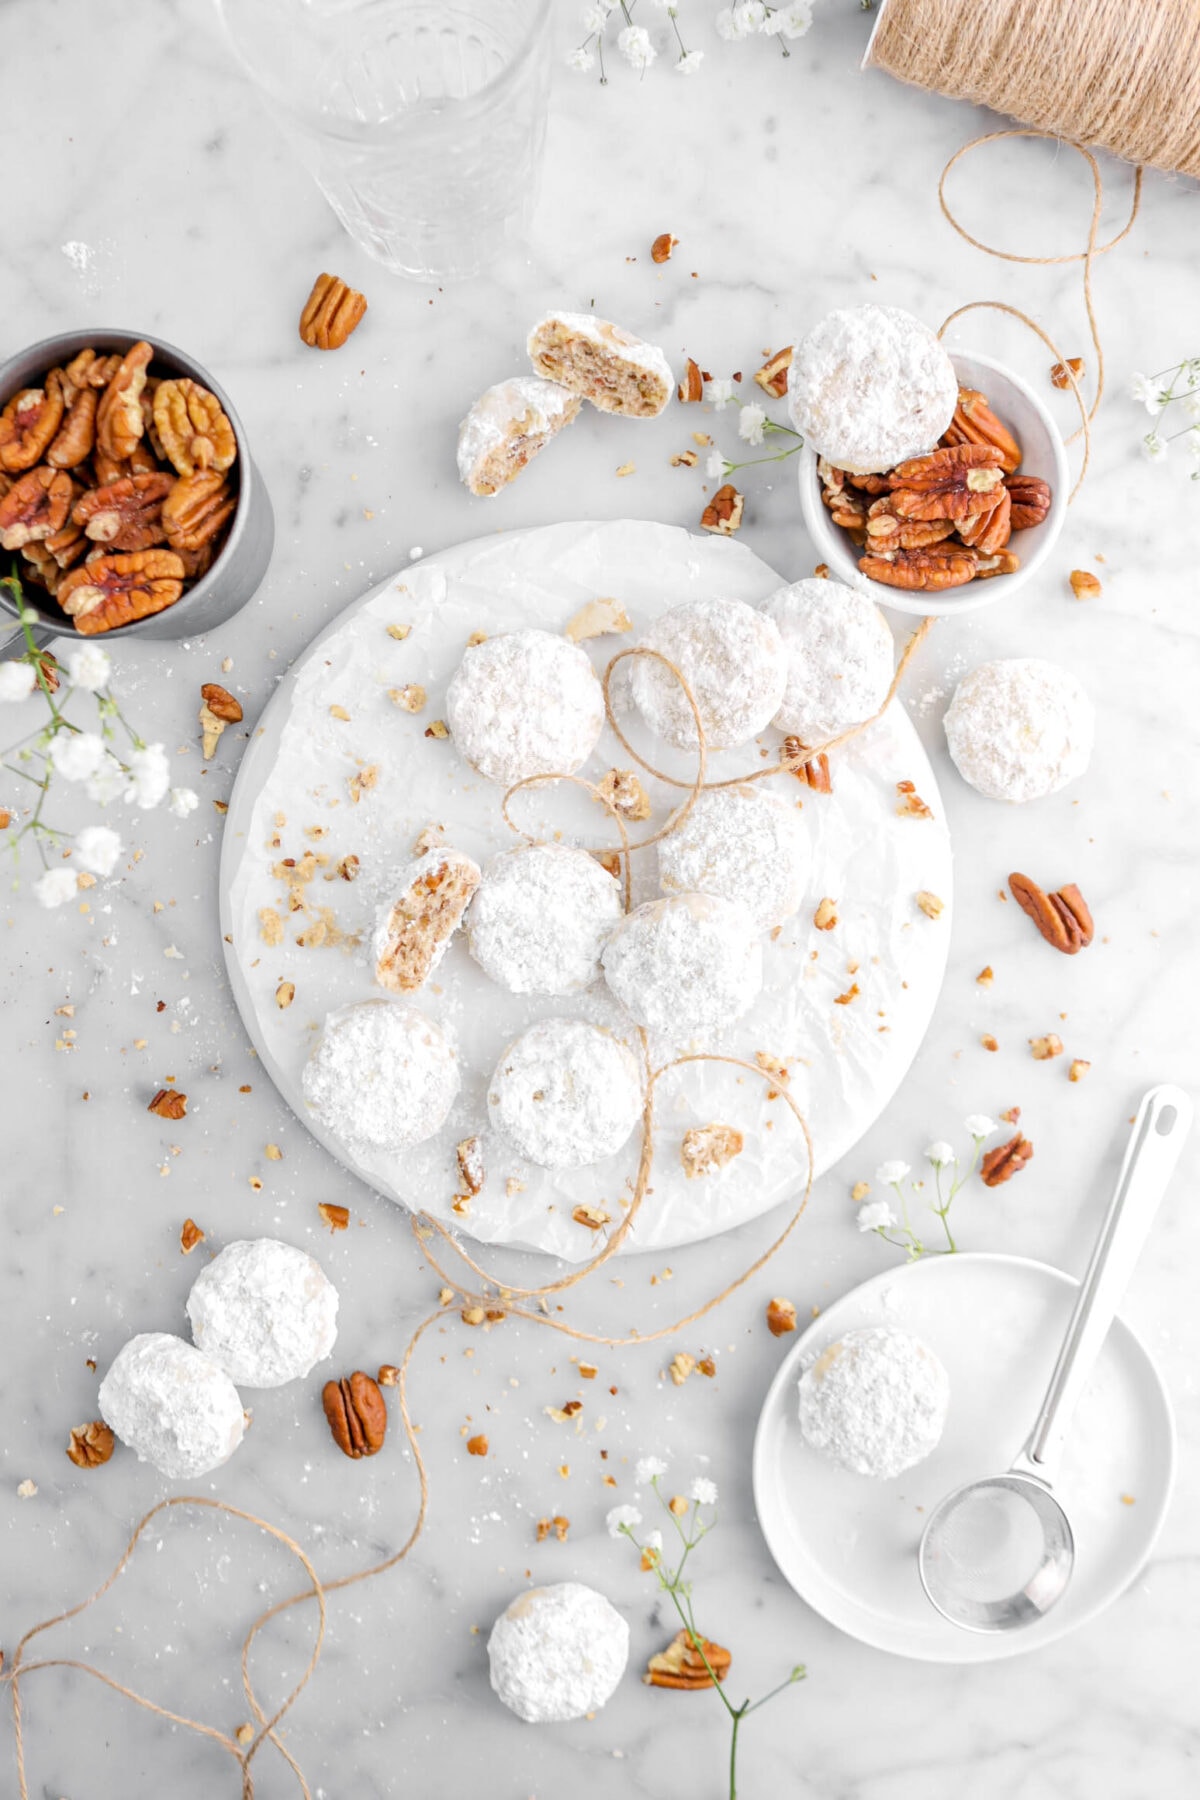 nine danish wedding cookies on white plate with one broken in half, more cookies around on marble surface with tan string